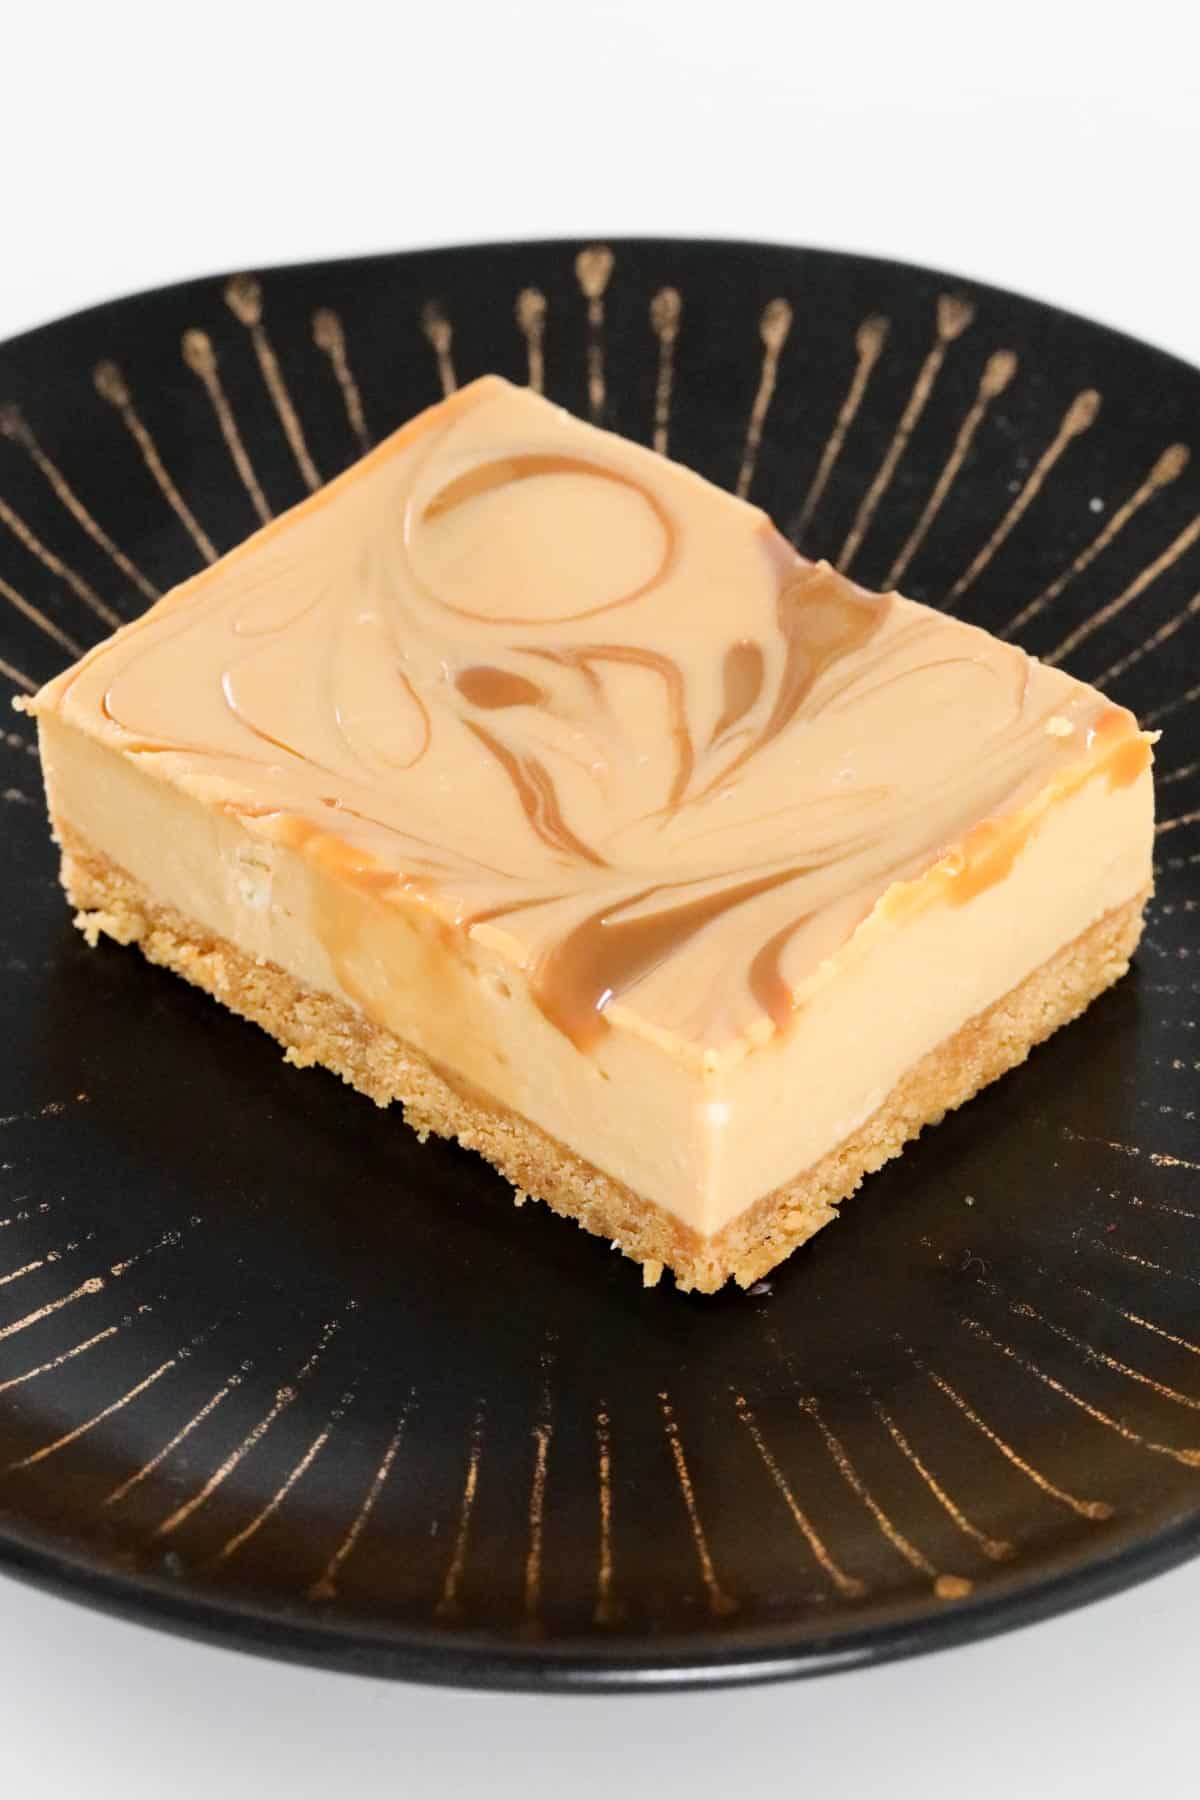 A piece of caramel cheesecake on a black and gold plate.